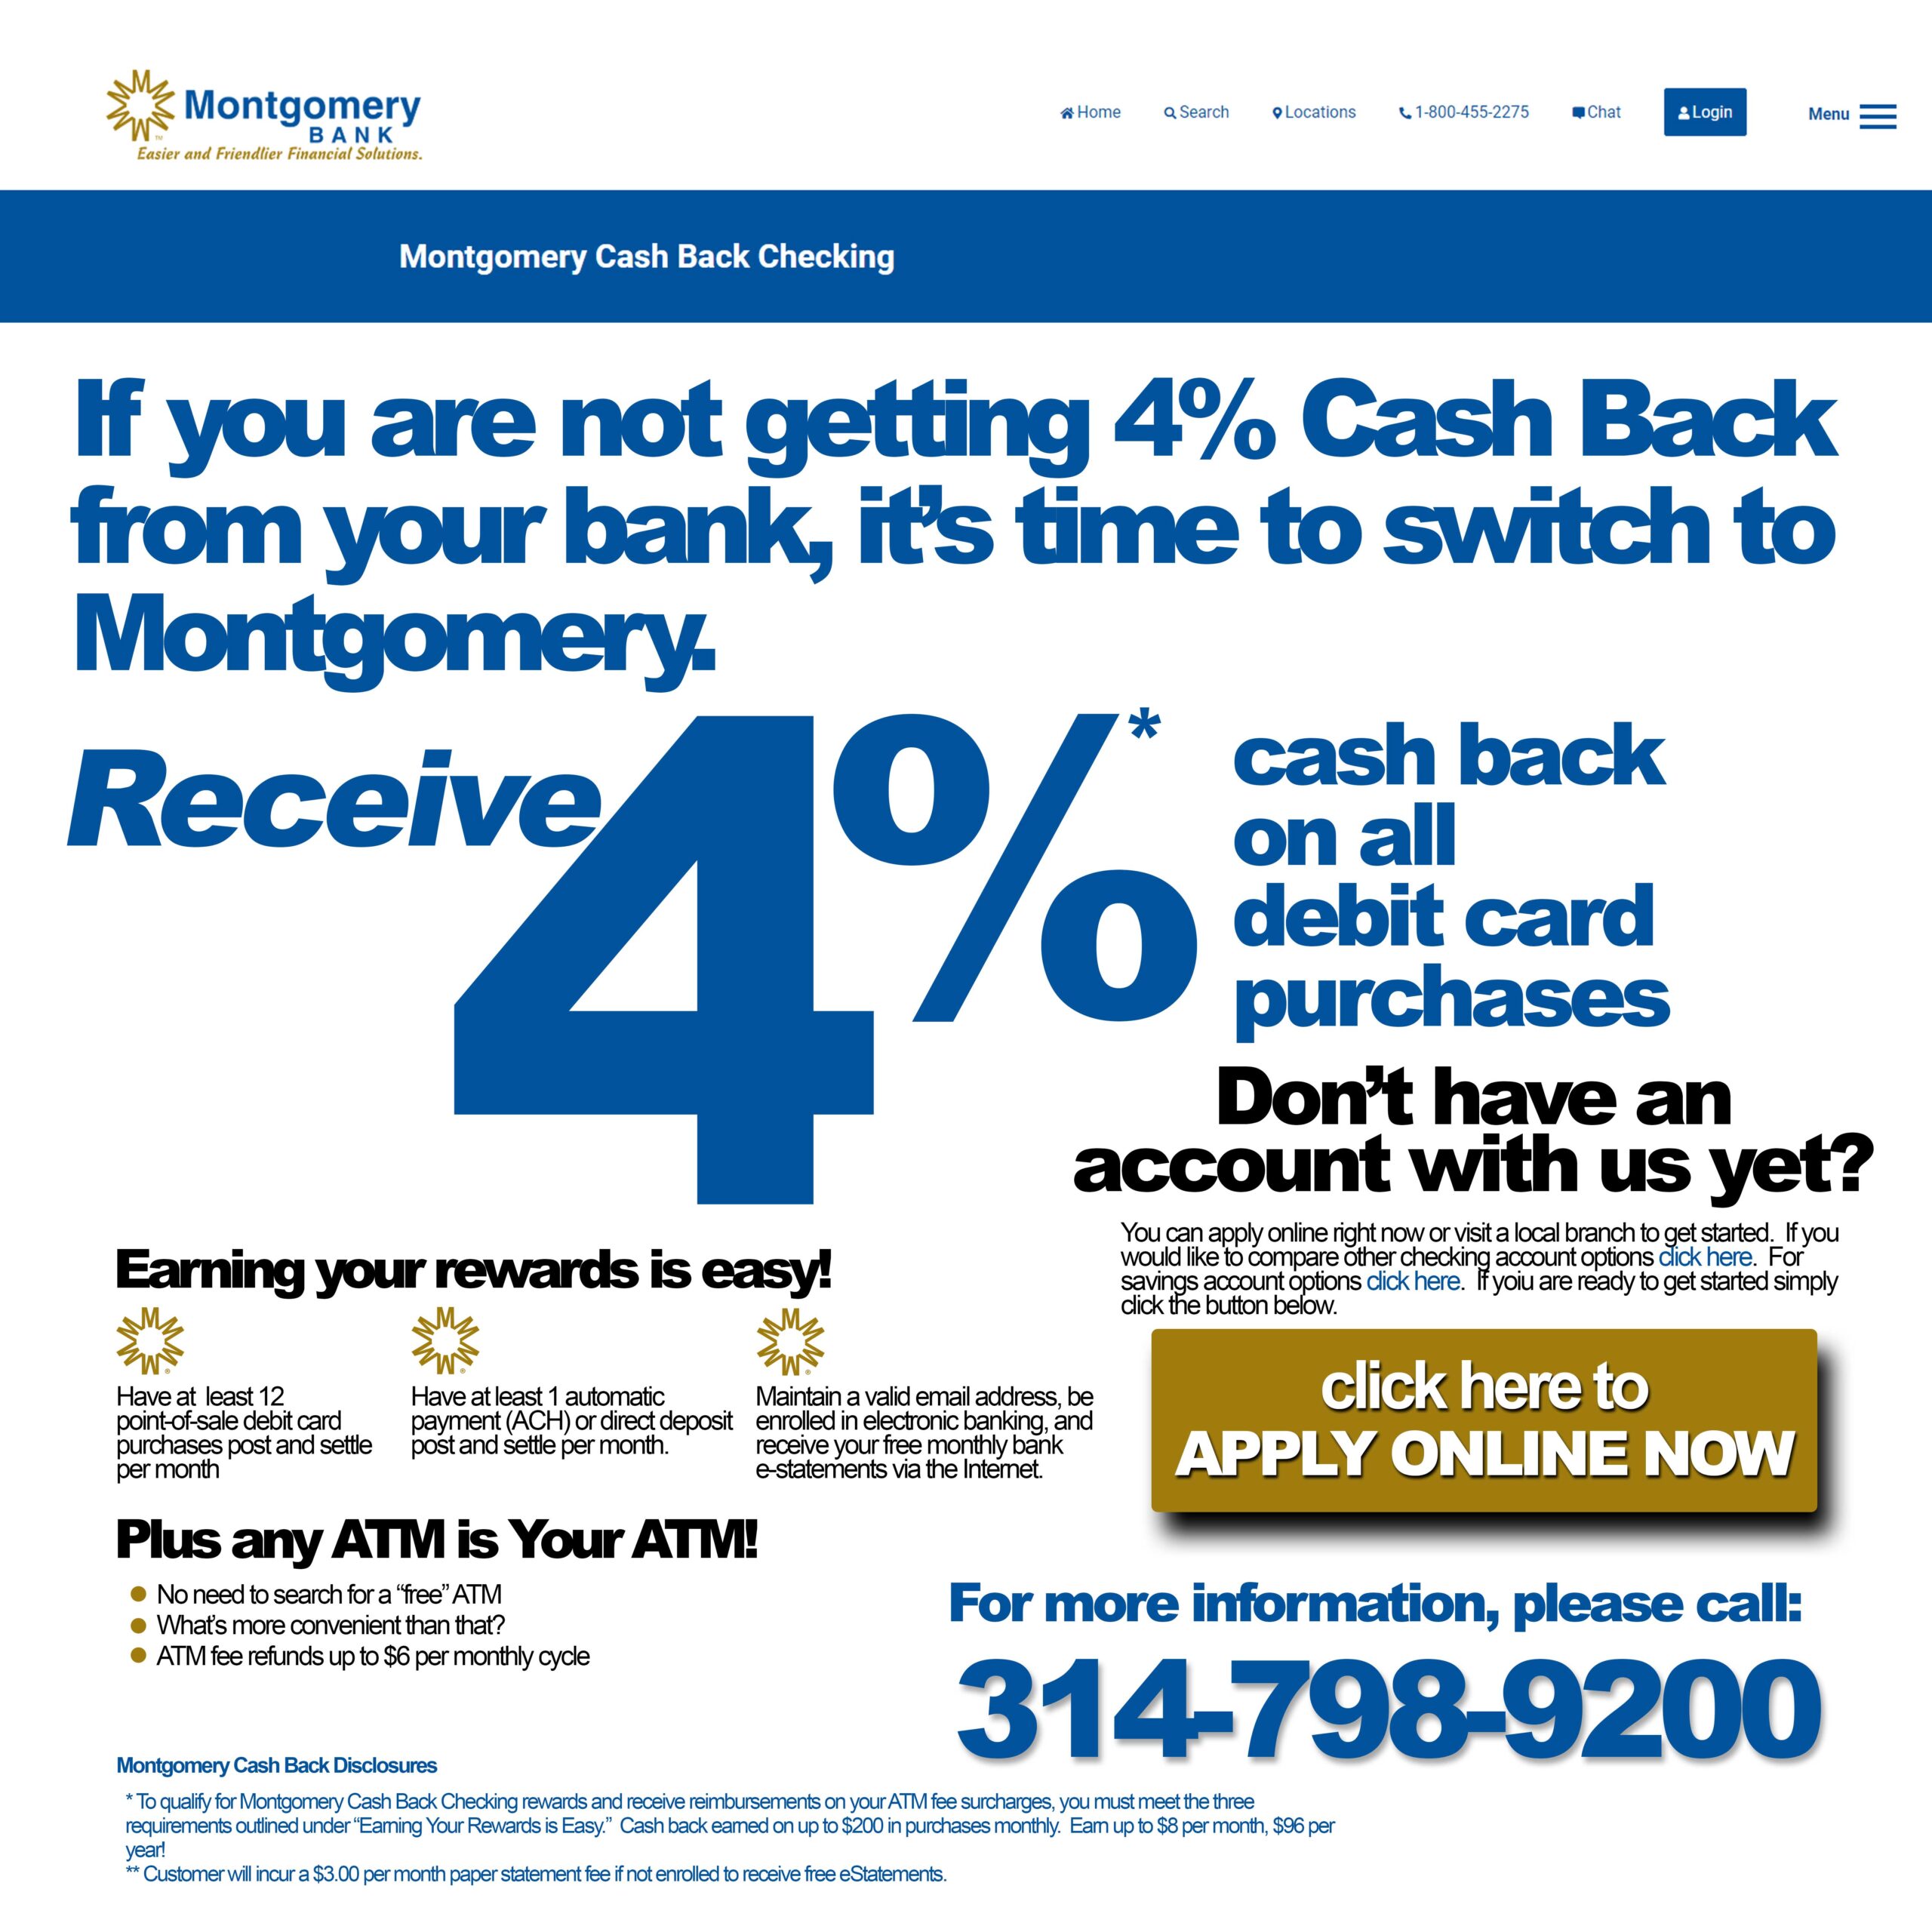 If you are not getting 4% cash back from your bank, it’s time to switch to Montgomery. Receive 4$ cash back on all debit card purchases. To earn your rewards, have at least 12 point of sale debit card purchases post and settle per month, have at least 1 automatic payment (ACH) or direct deposit post and settle per month, and maintain a valid email address, be enroll in electronic banking and receive your free monthly bank e-statements via the internet. Also you can use any ATM as your ATM, no need to search for a free ATM.(ATM fee refunds up to $6 per monthly cycle). For more information please call 314.207.2370